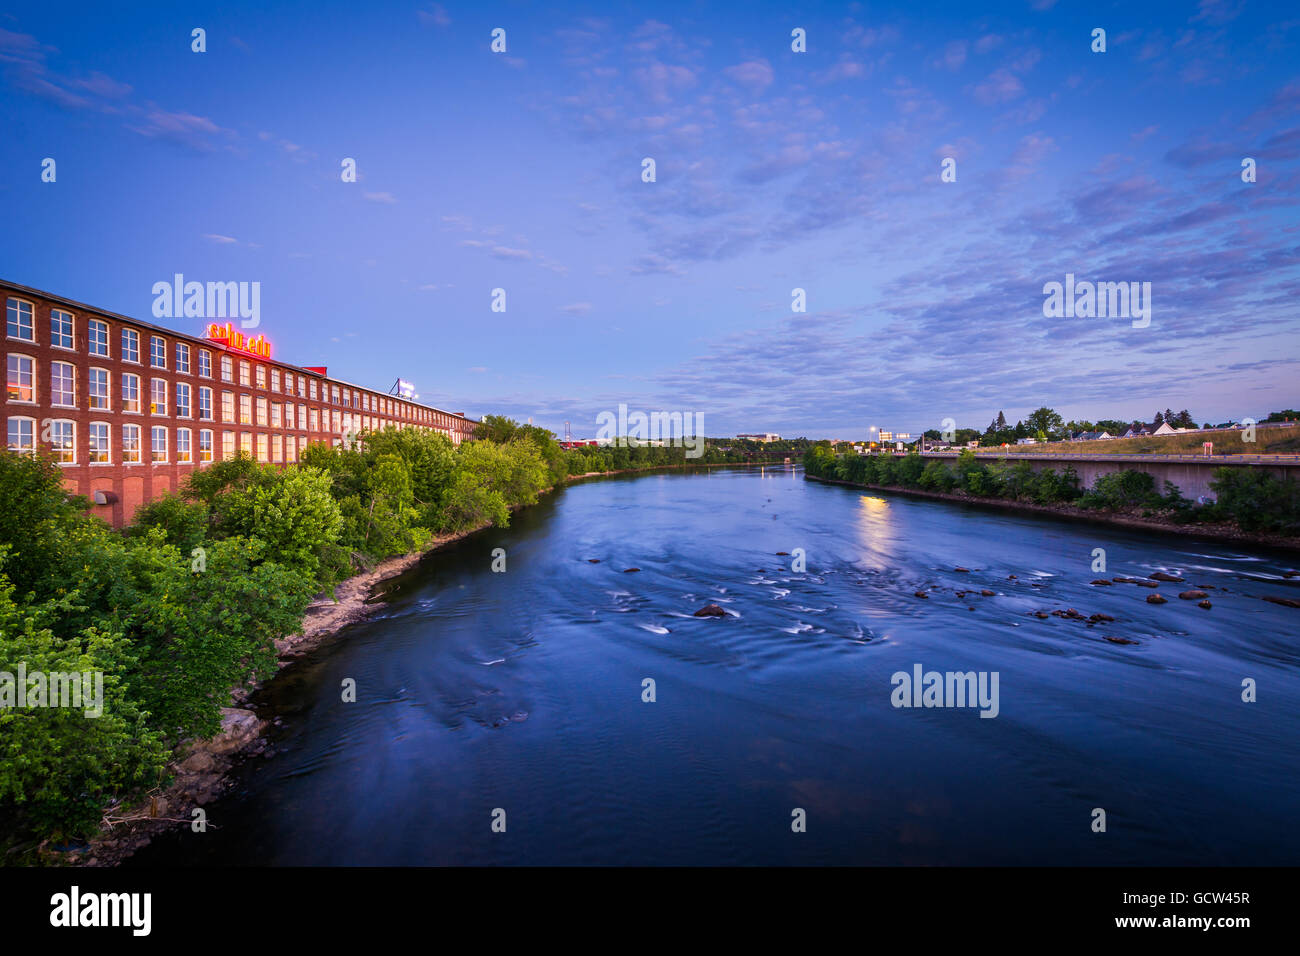 The Merrimack River at night, in downtown Manchester, New Hampshire. Stock Photo